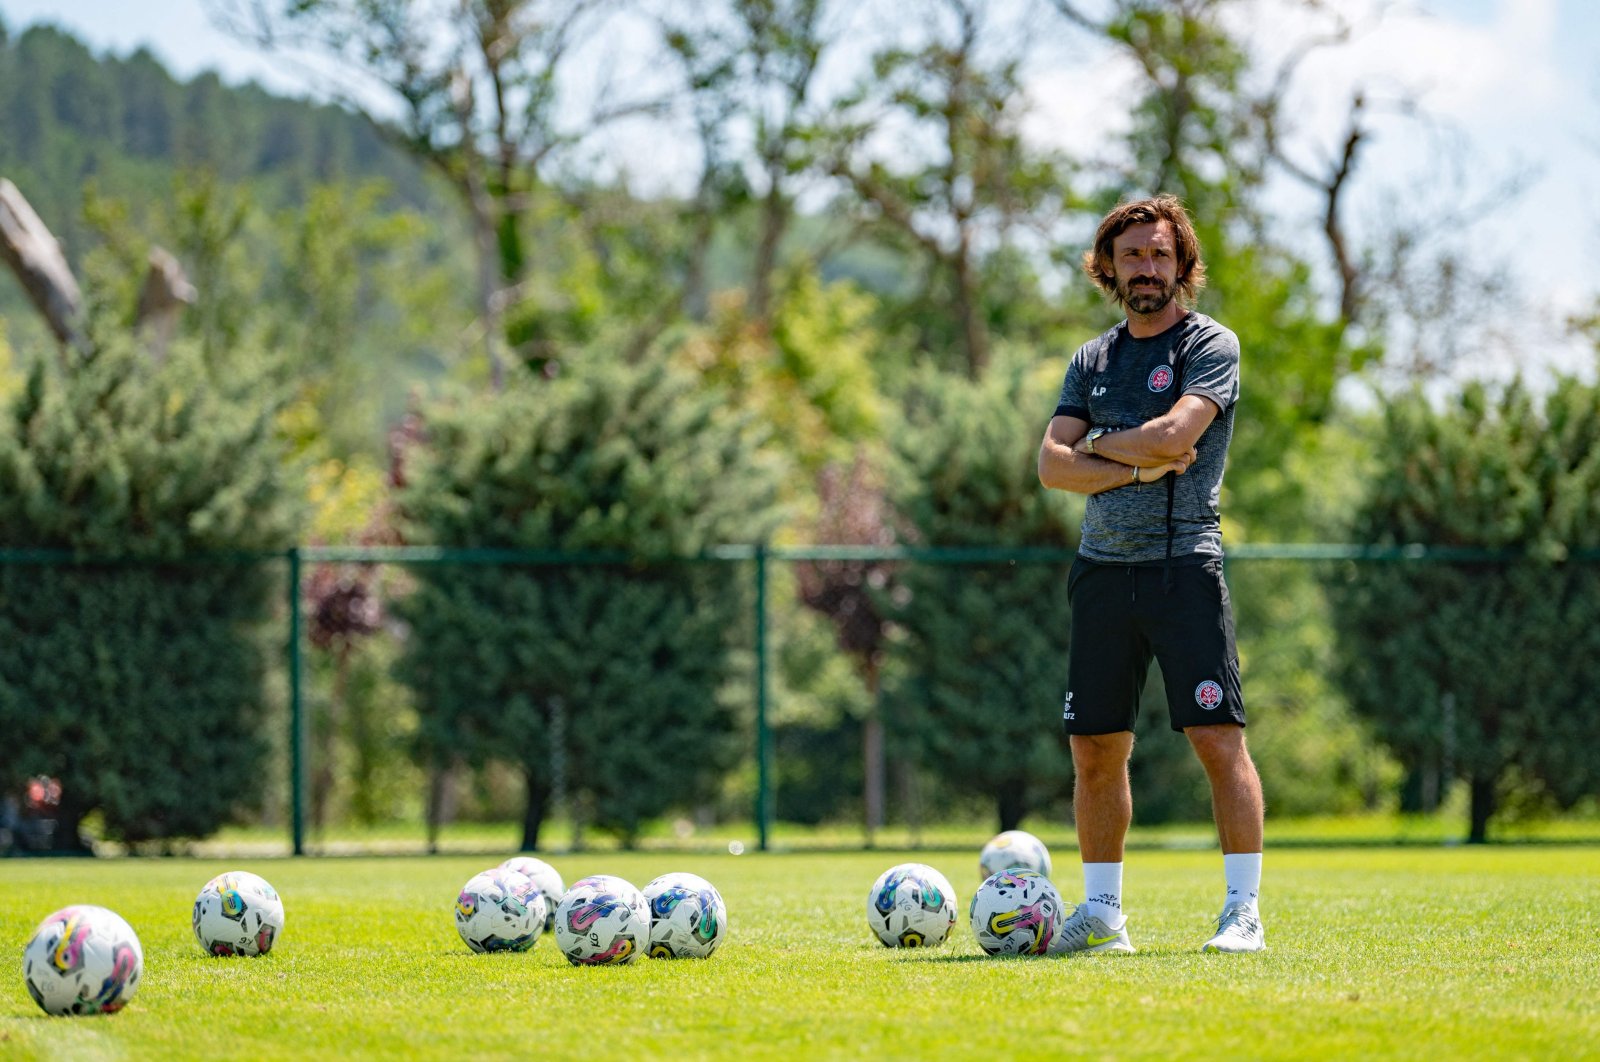 Andrea Pirlo attends a training session at Turkish Football Federation (TFF) facilities in Istanbul, Turkey, July 27, 2022. (AFP PHOTO)